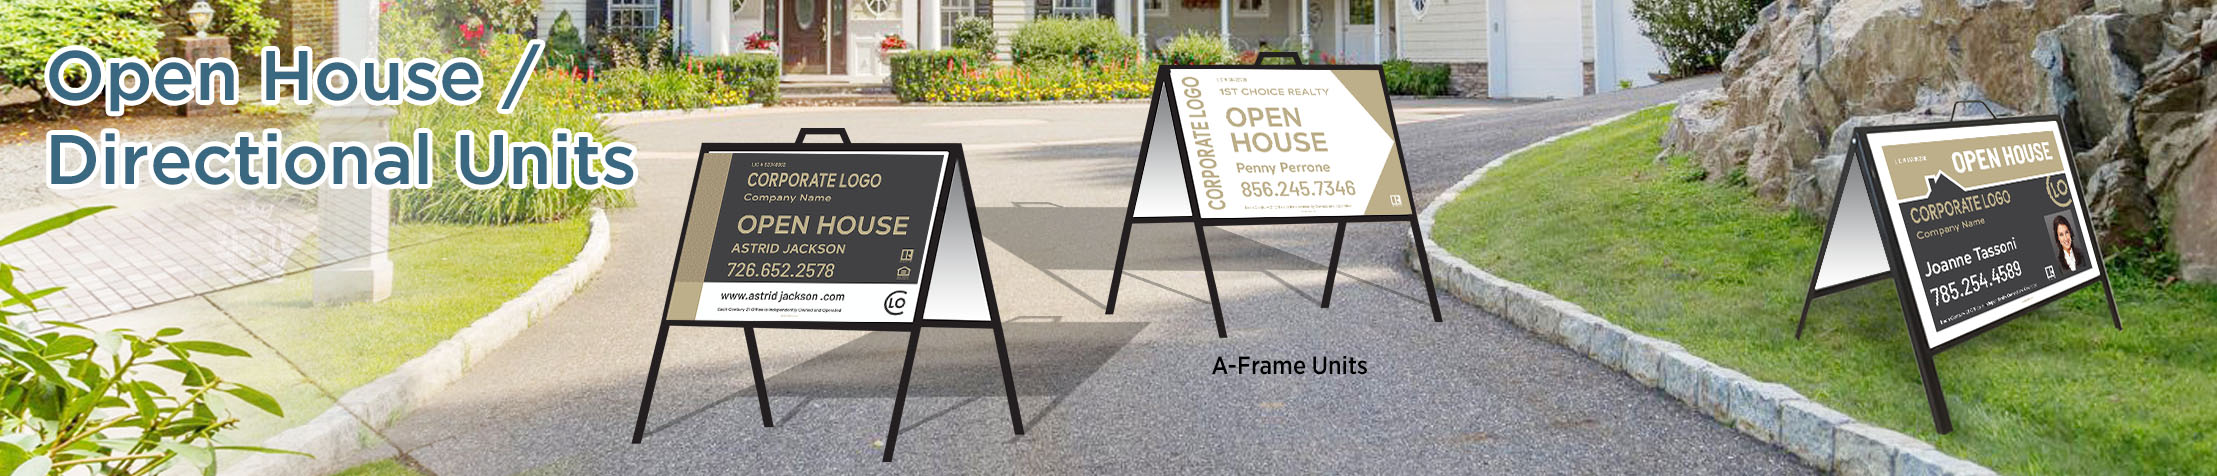 Century 21 Real Estate Open House/Directional Units - Century 21  directional real estate signs | BestPrintBuy.com